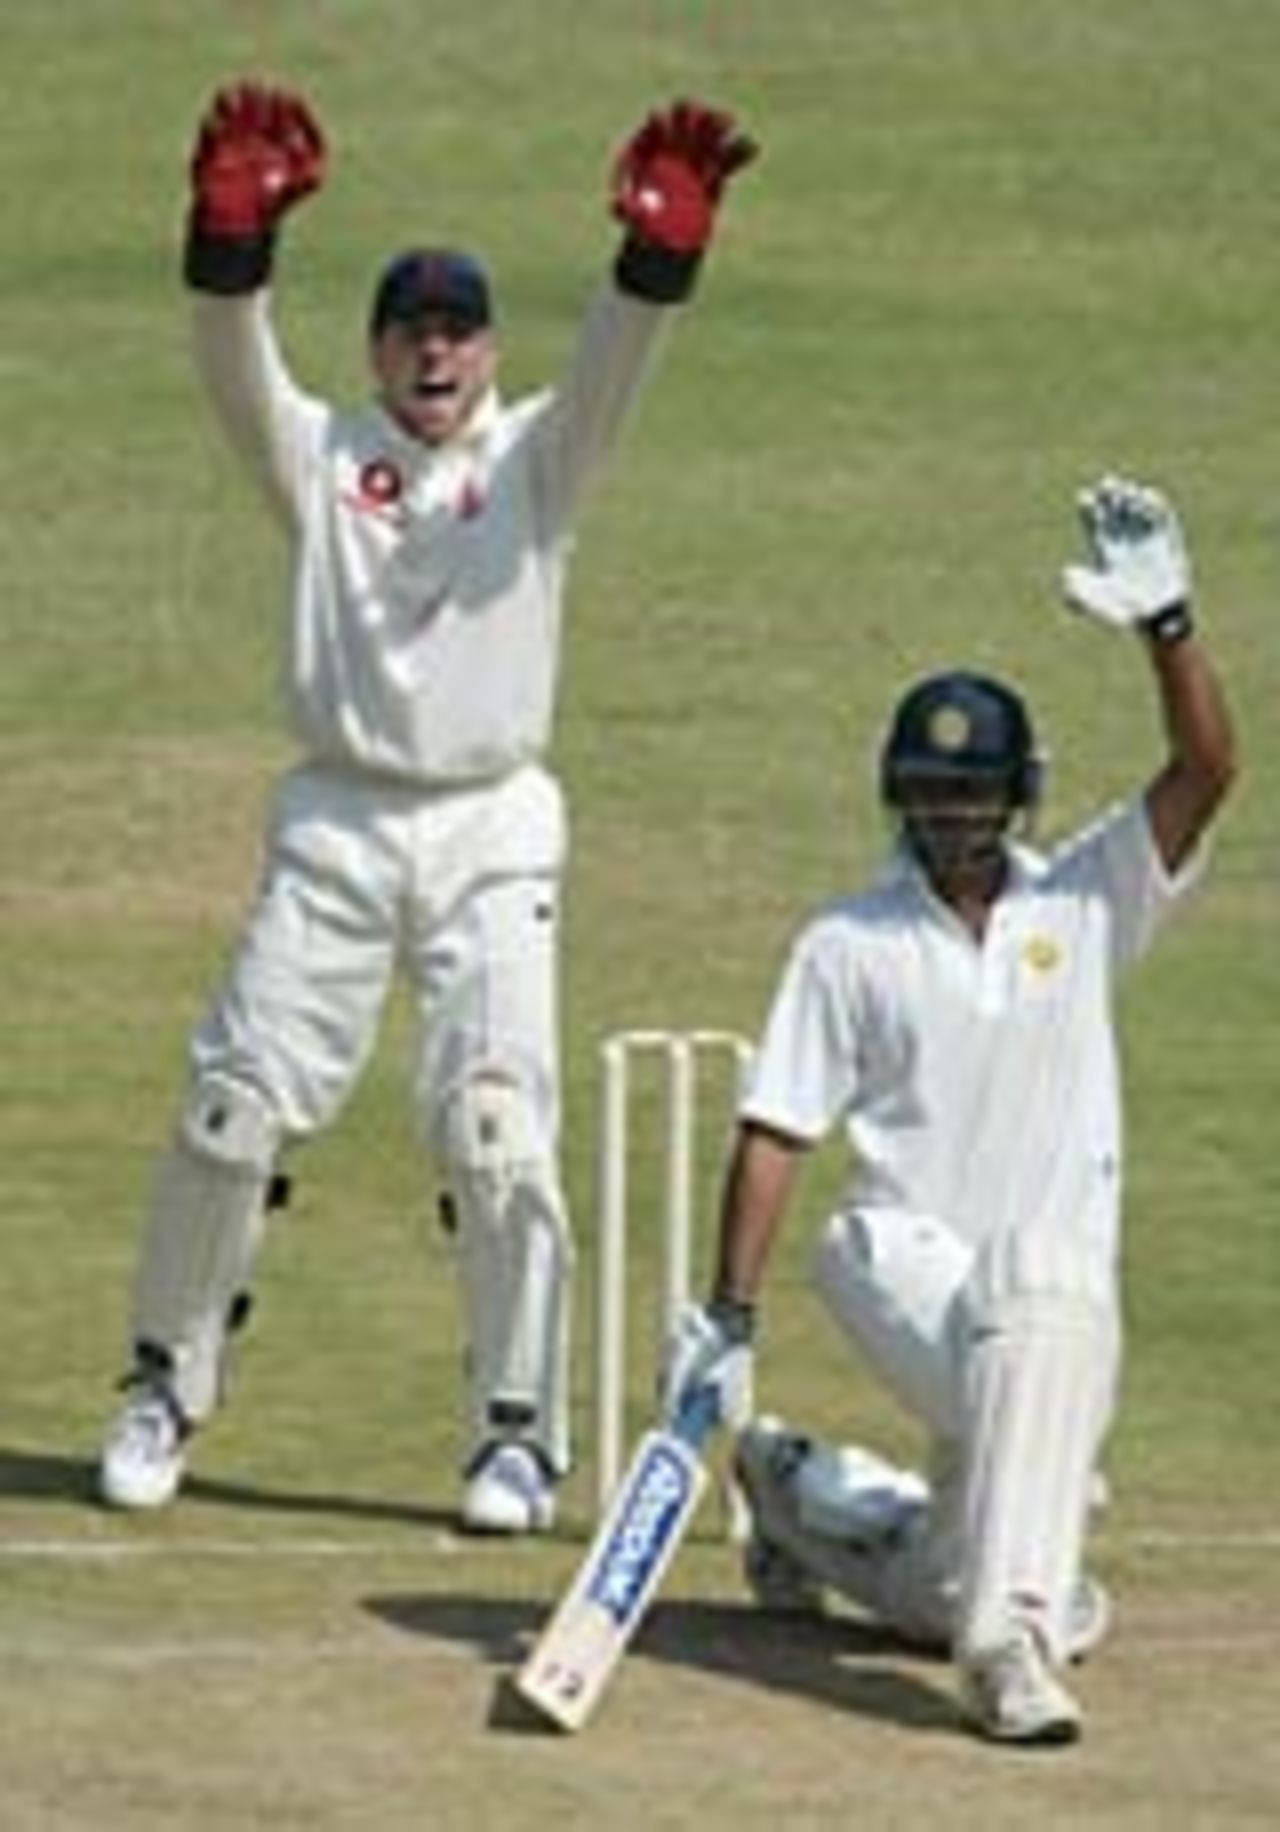 Dinesh Mongia survives a confident appeal from Matthew Prior, India A v England A, Banglalore, February 9, 2004